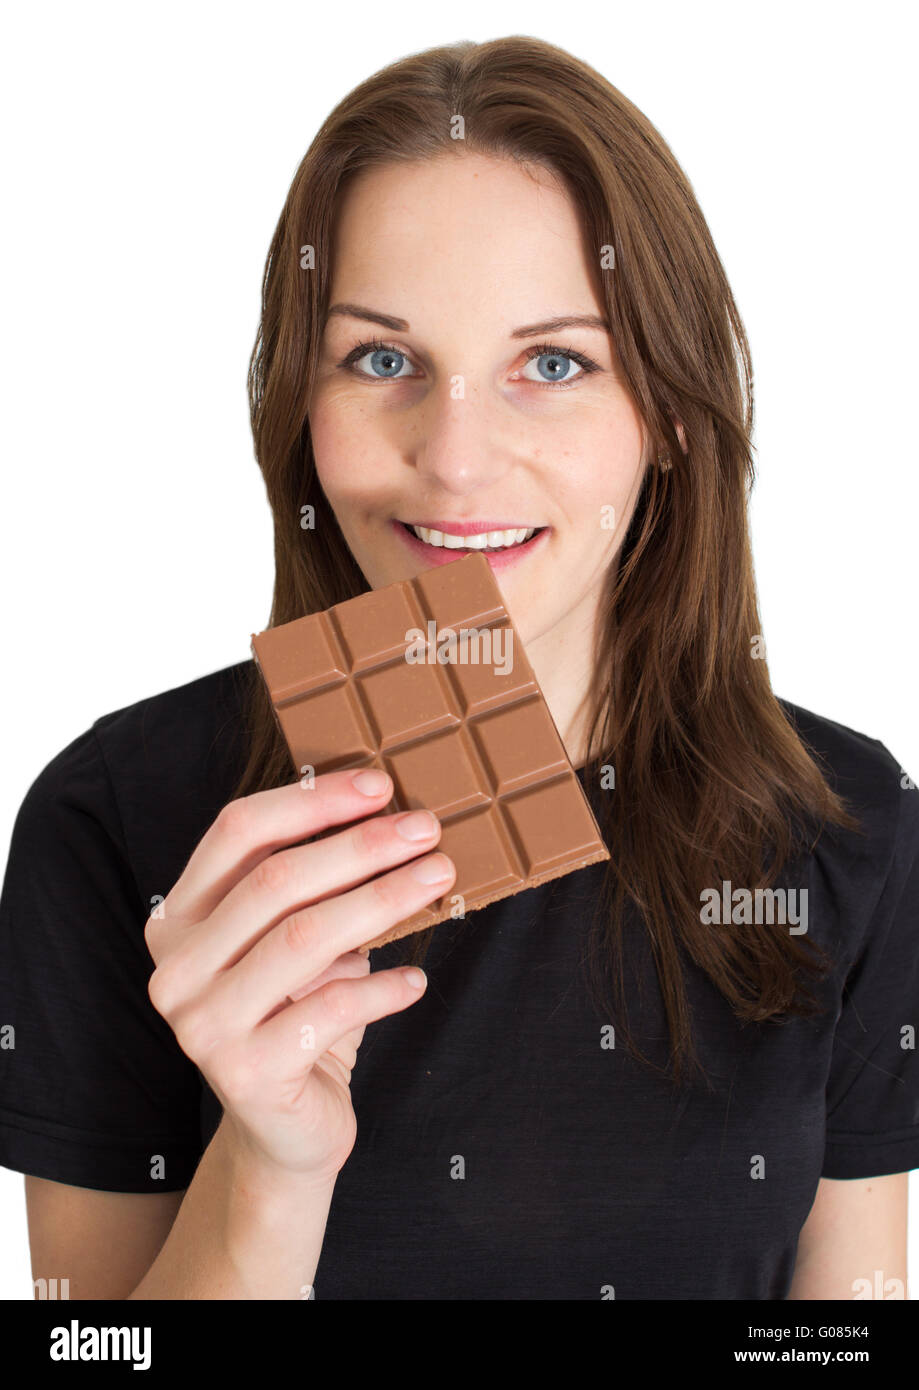 Young Brunette Woman Eating A Milk Chocolate Bar and Smiling Stock Photo